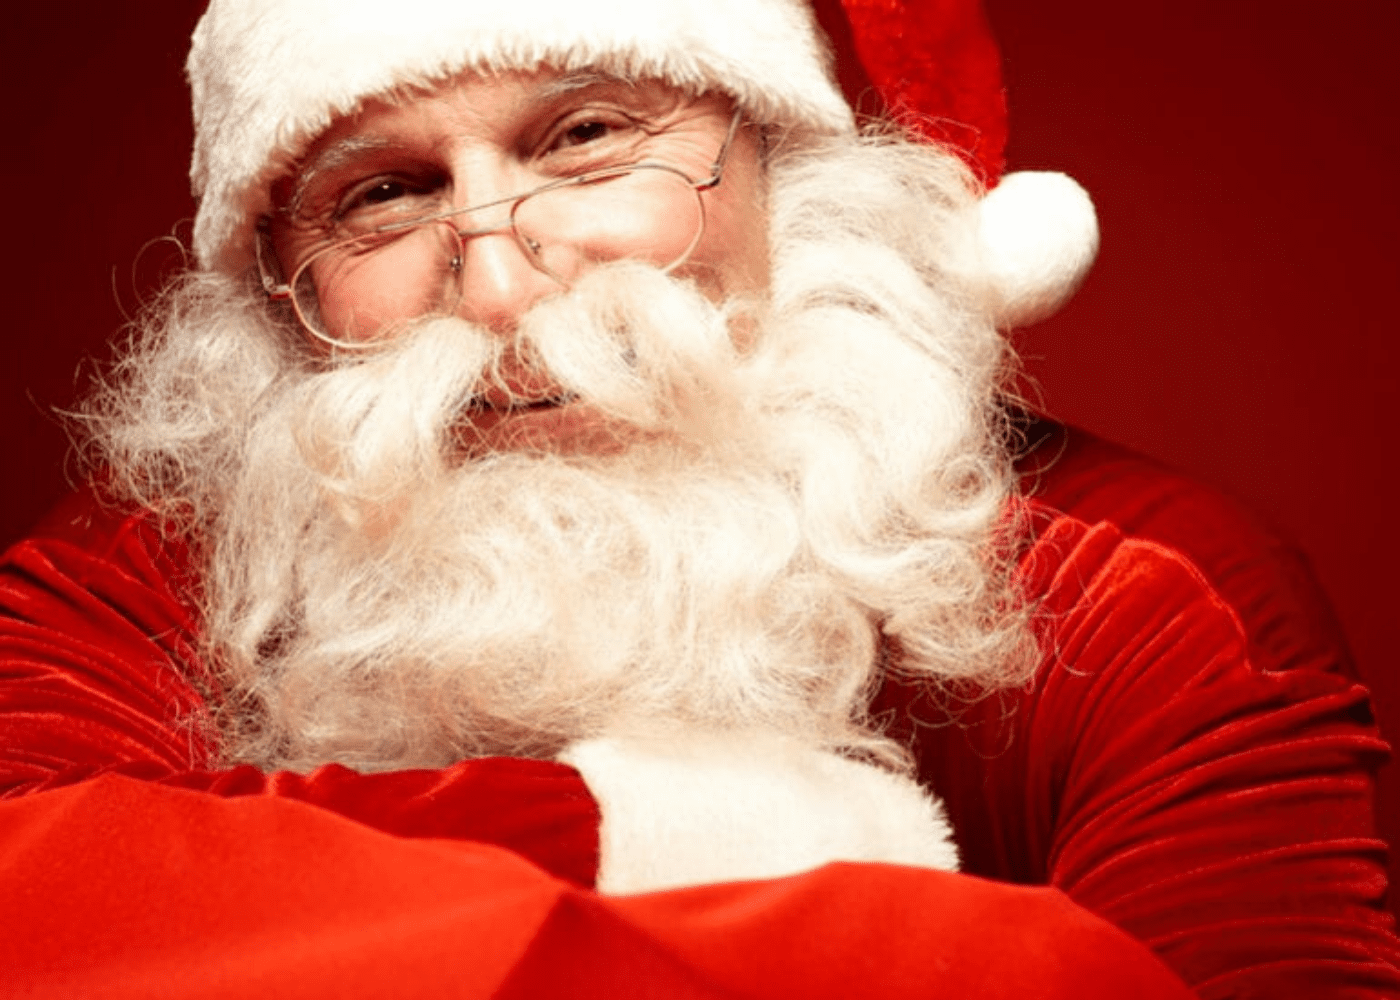 Where to find Santa Claus in Singapore this Christmas 2022 featured image